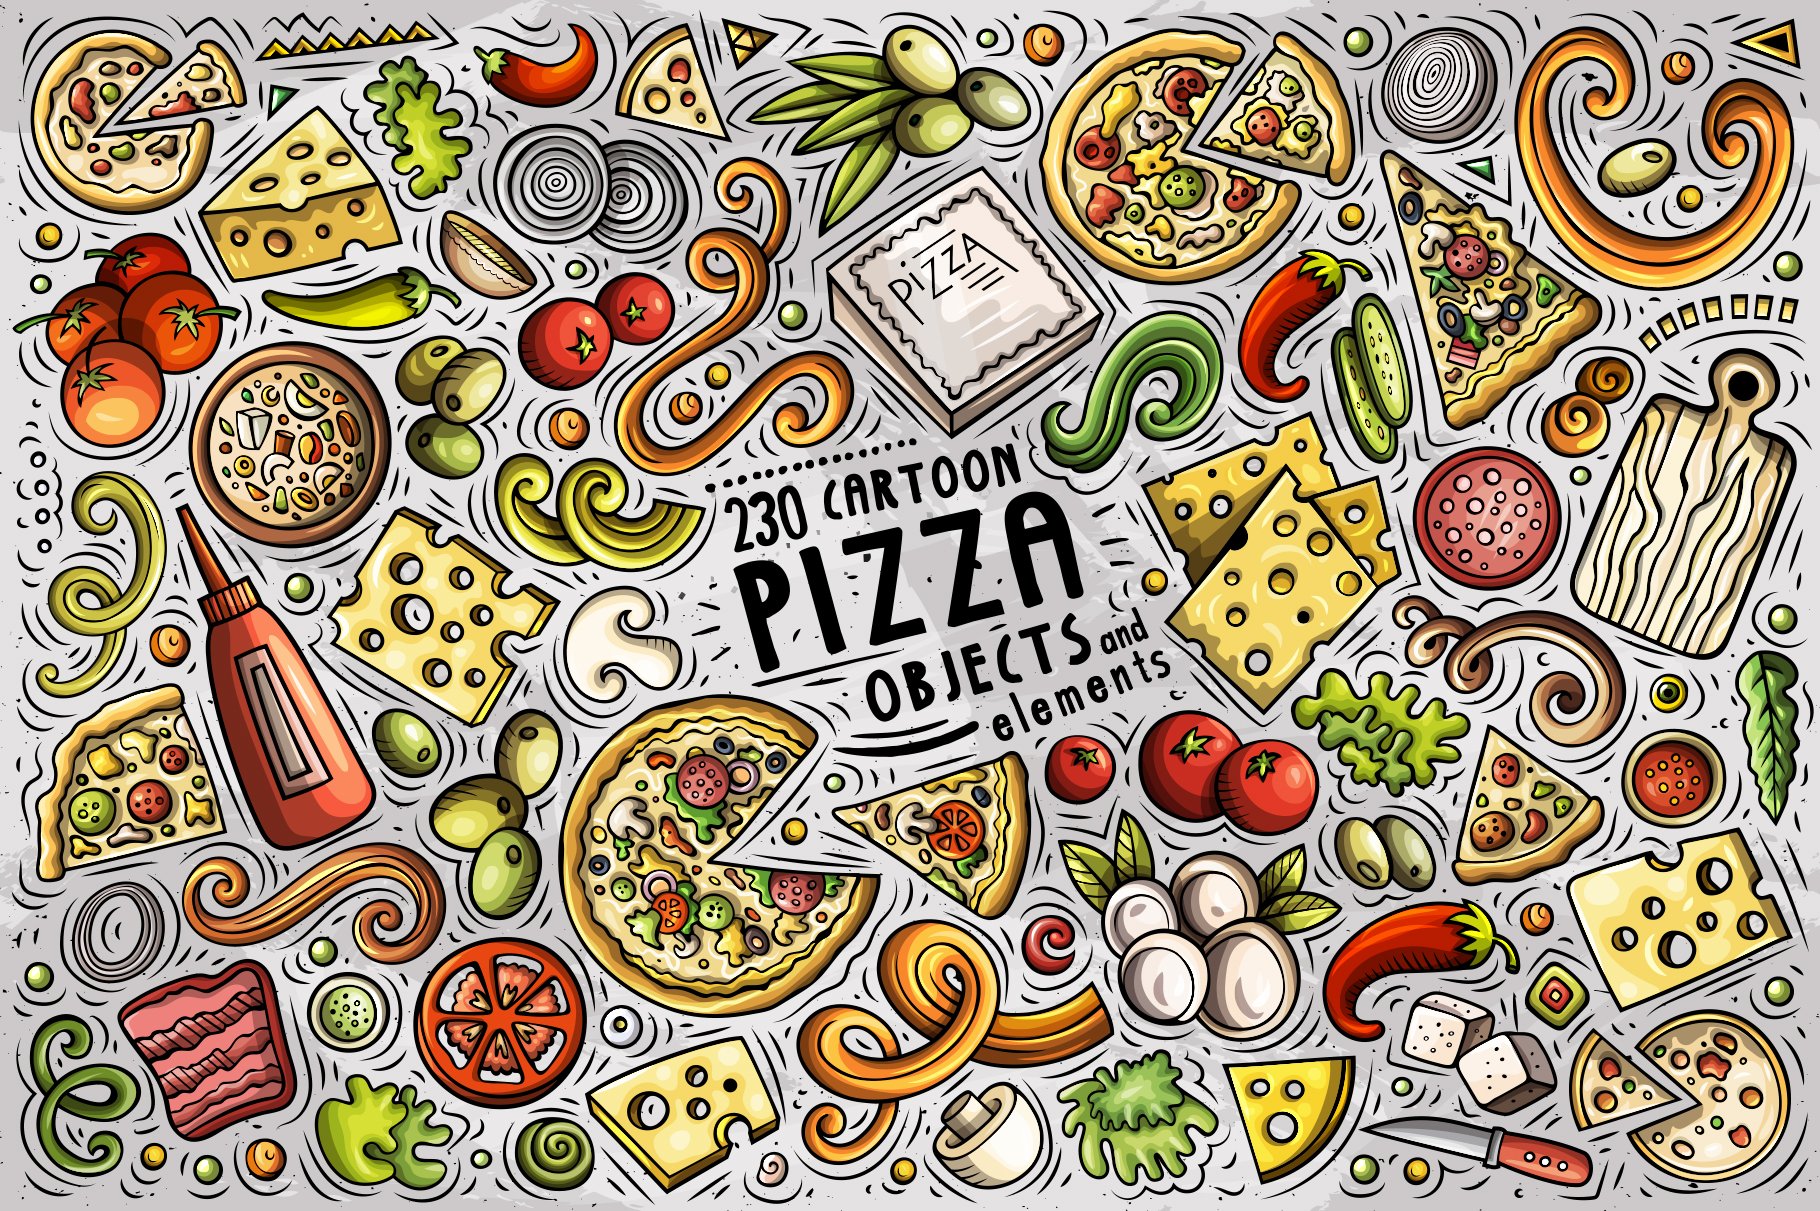 Pizza Cartoon Vector Objects Set cover image.